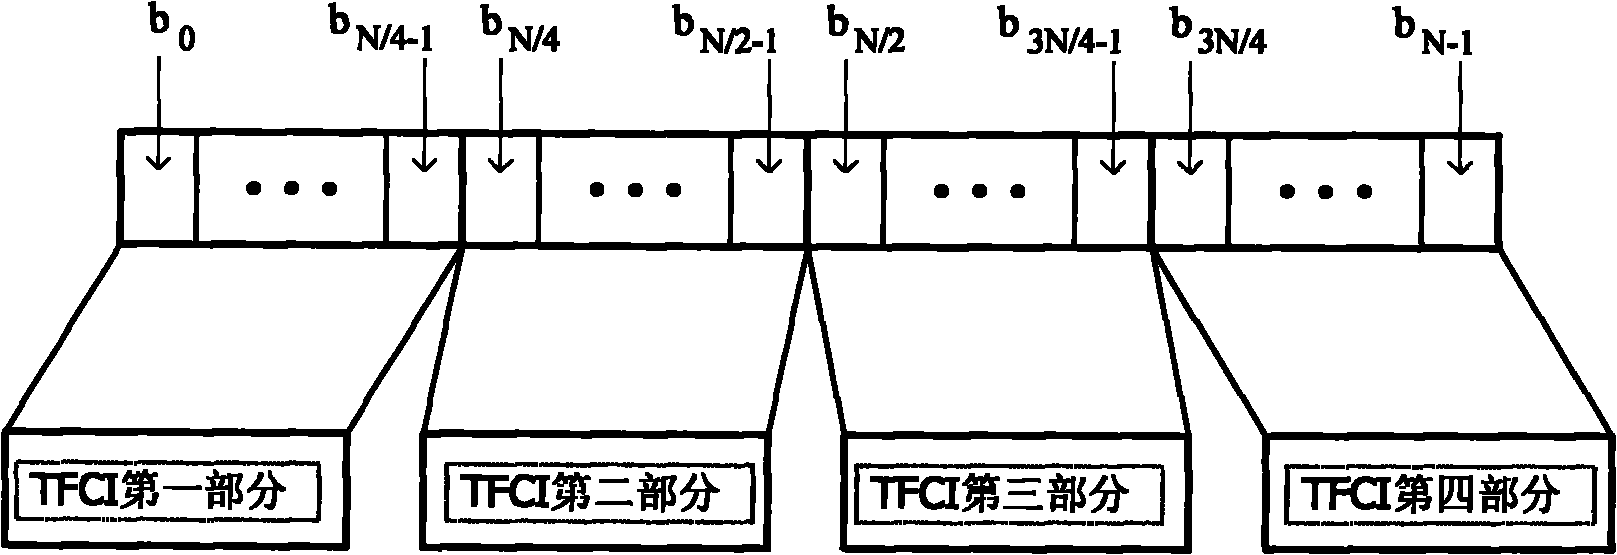 Method for transmitting TFCI data and TD-SCDMA trunking communication system